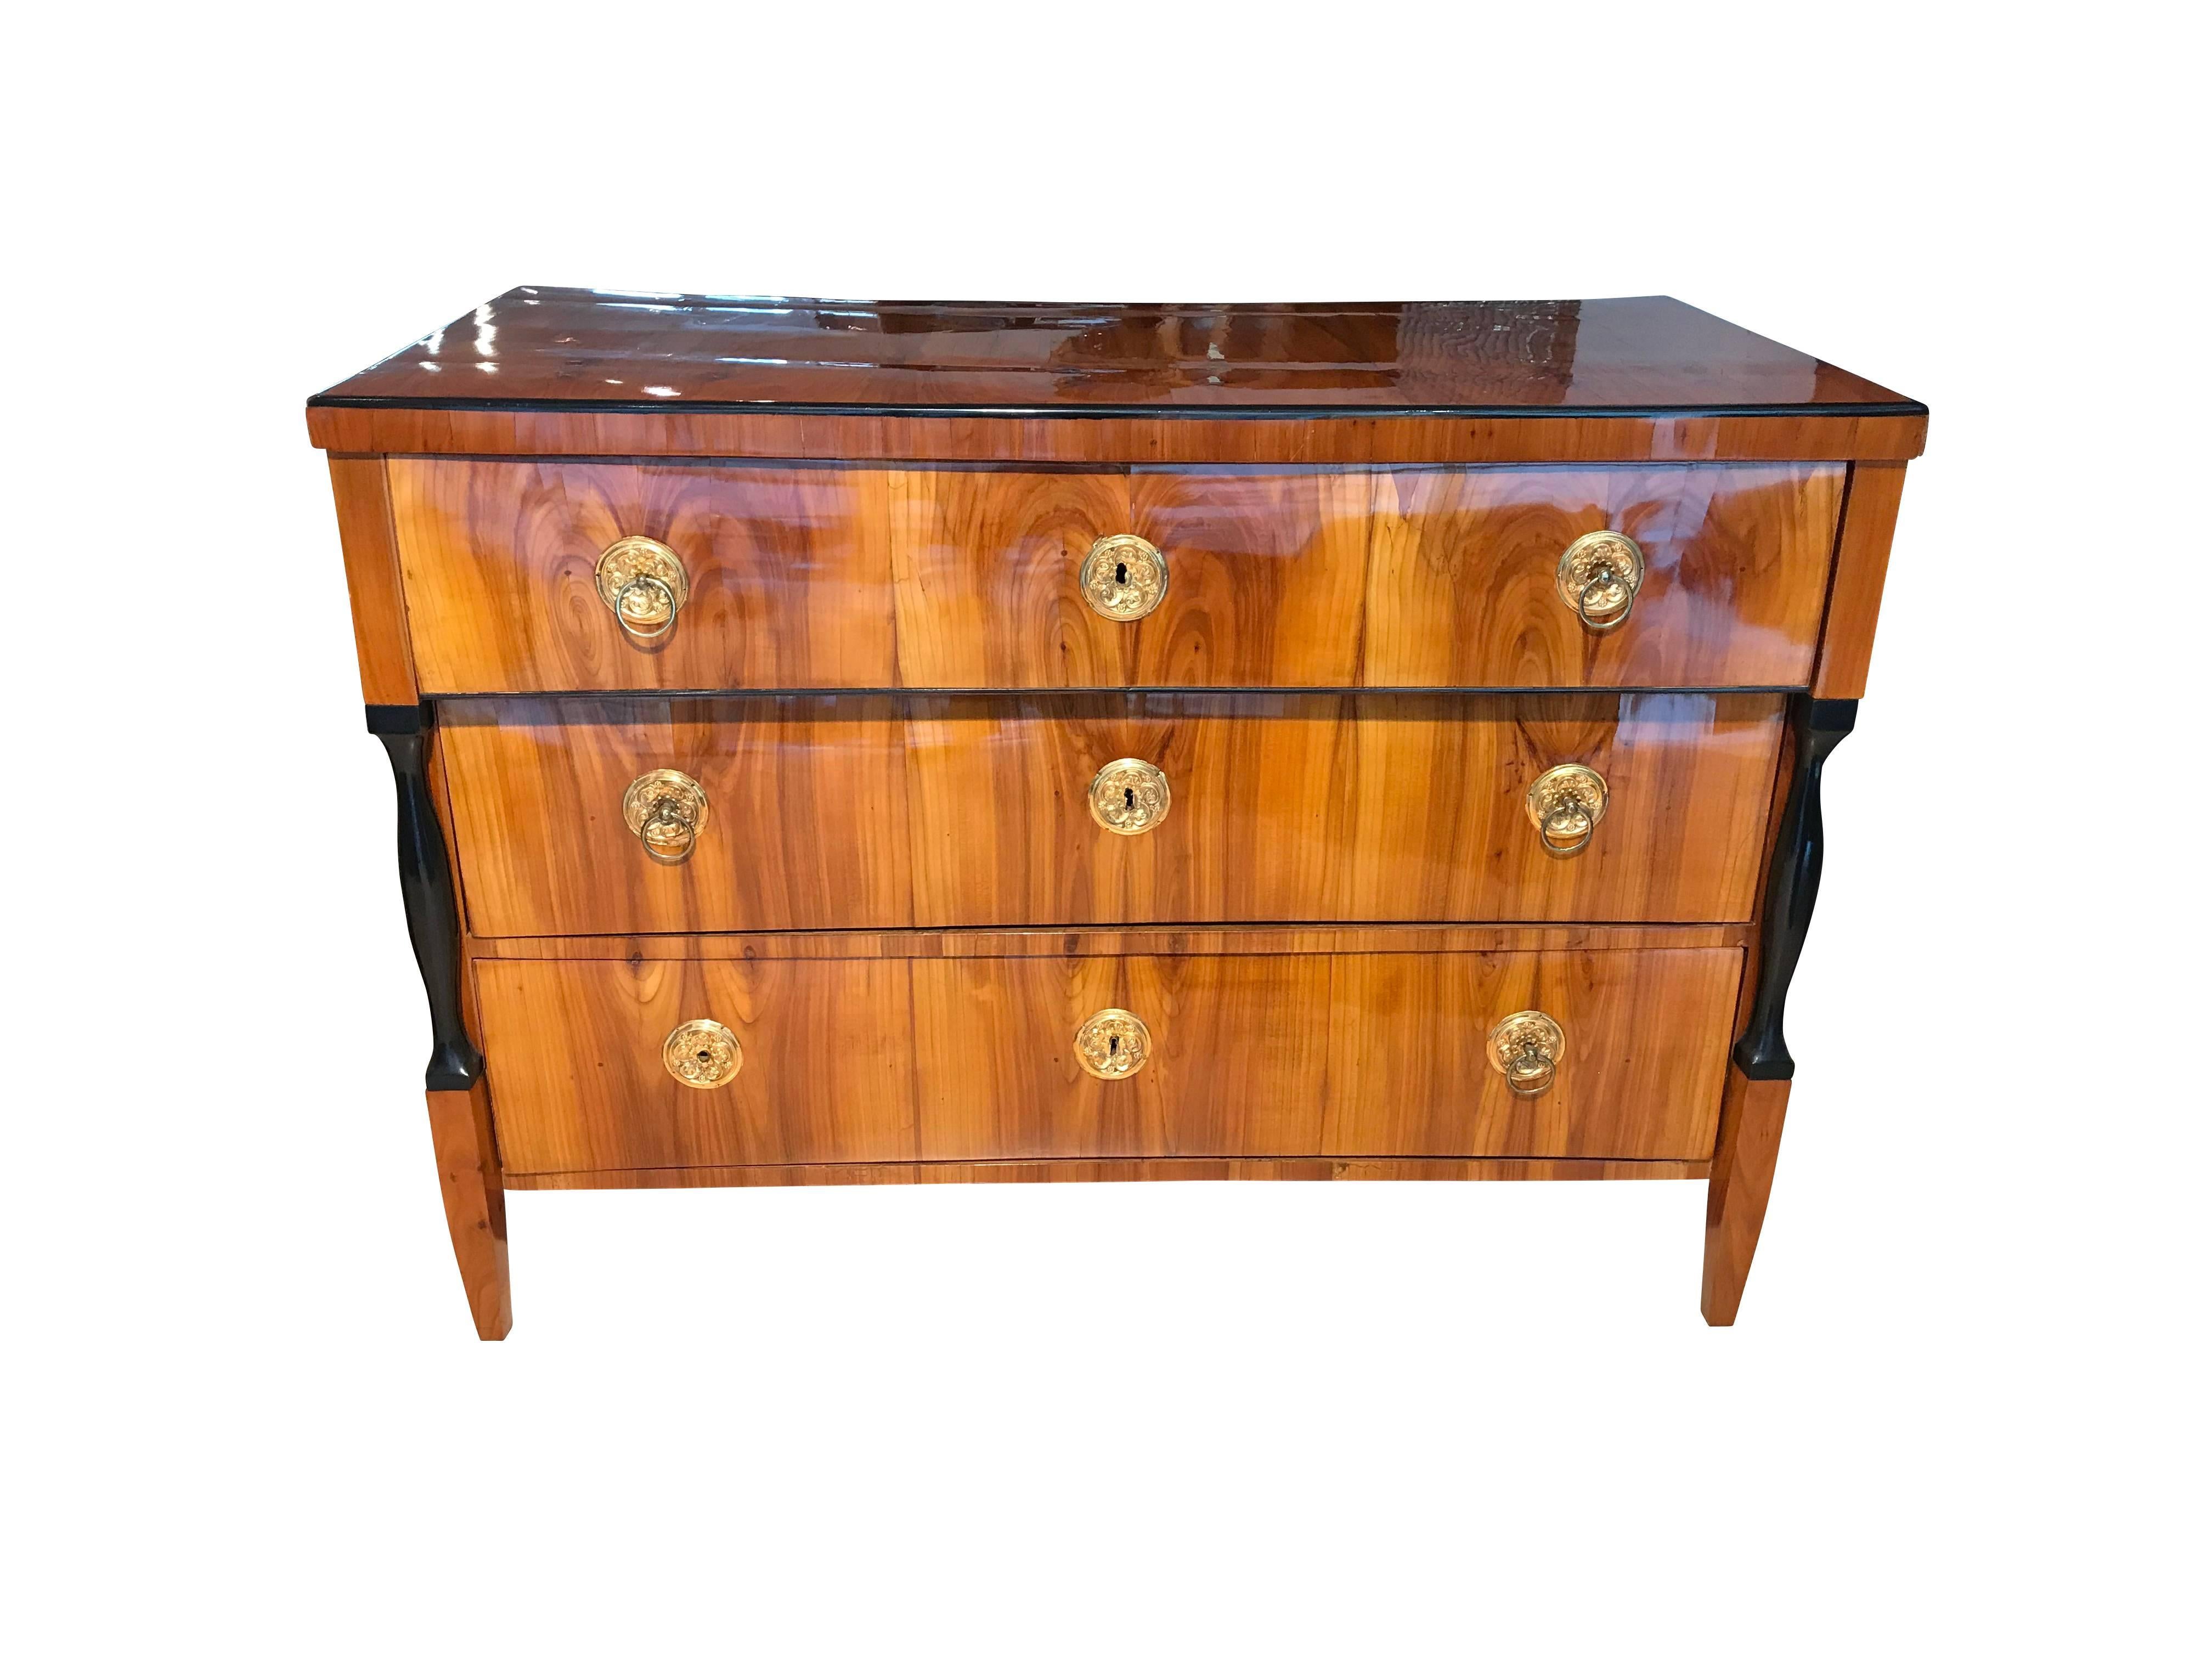 Wonderful, spacious neoclassical Biedermeier Commode / Chest of Three Drawers. Original brass hardware and beautiful cherry veneer. The two half-columns at the sides are ebonized. All the woodwork has been hand-polished with shellac (French Polish).